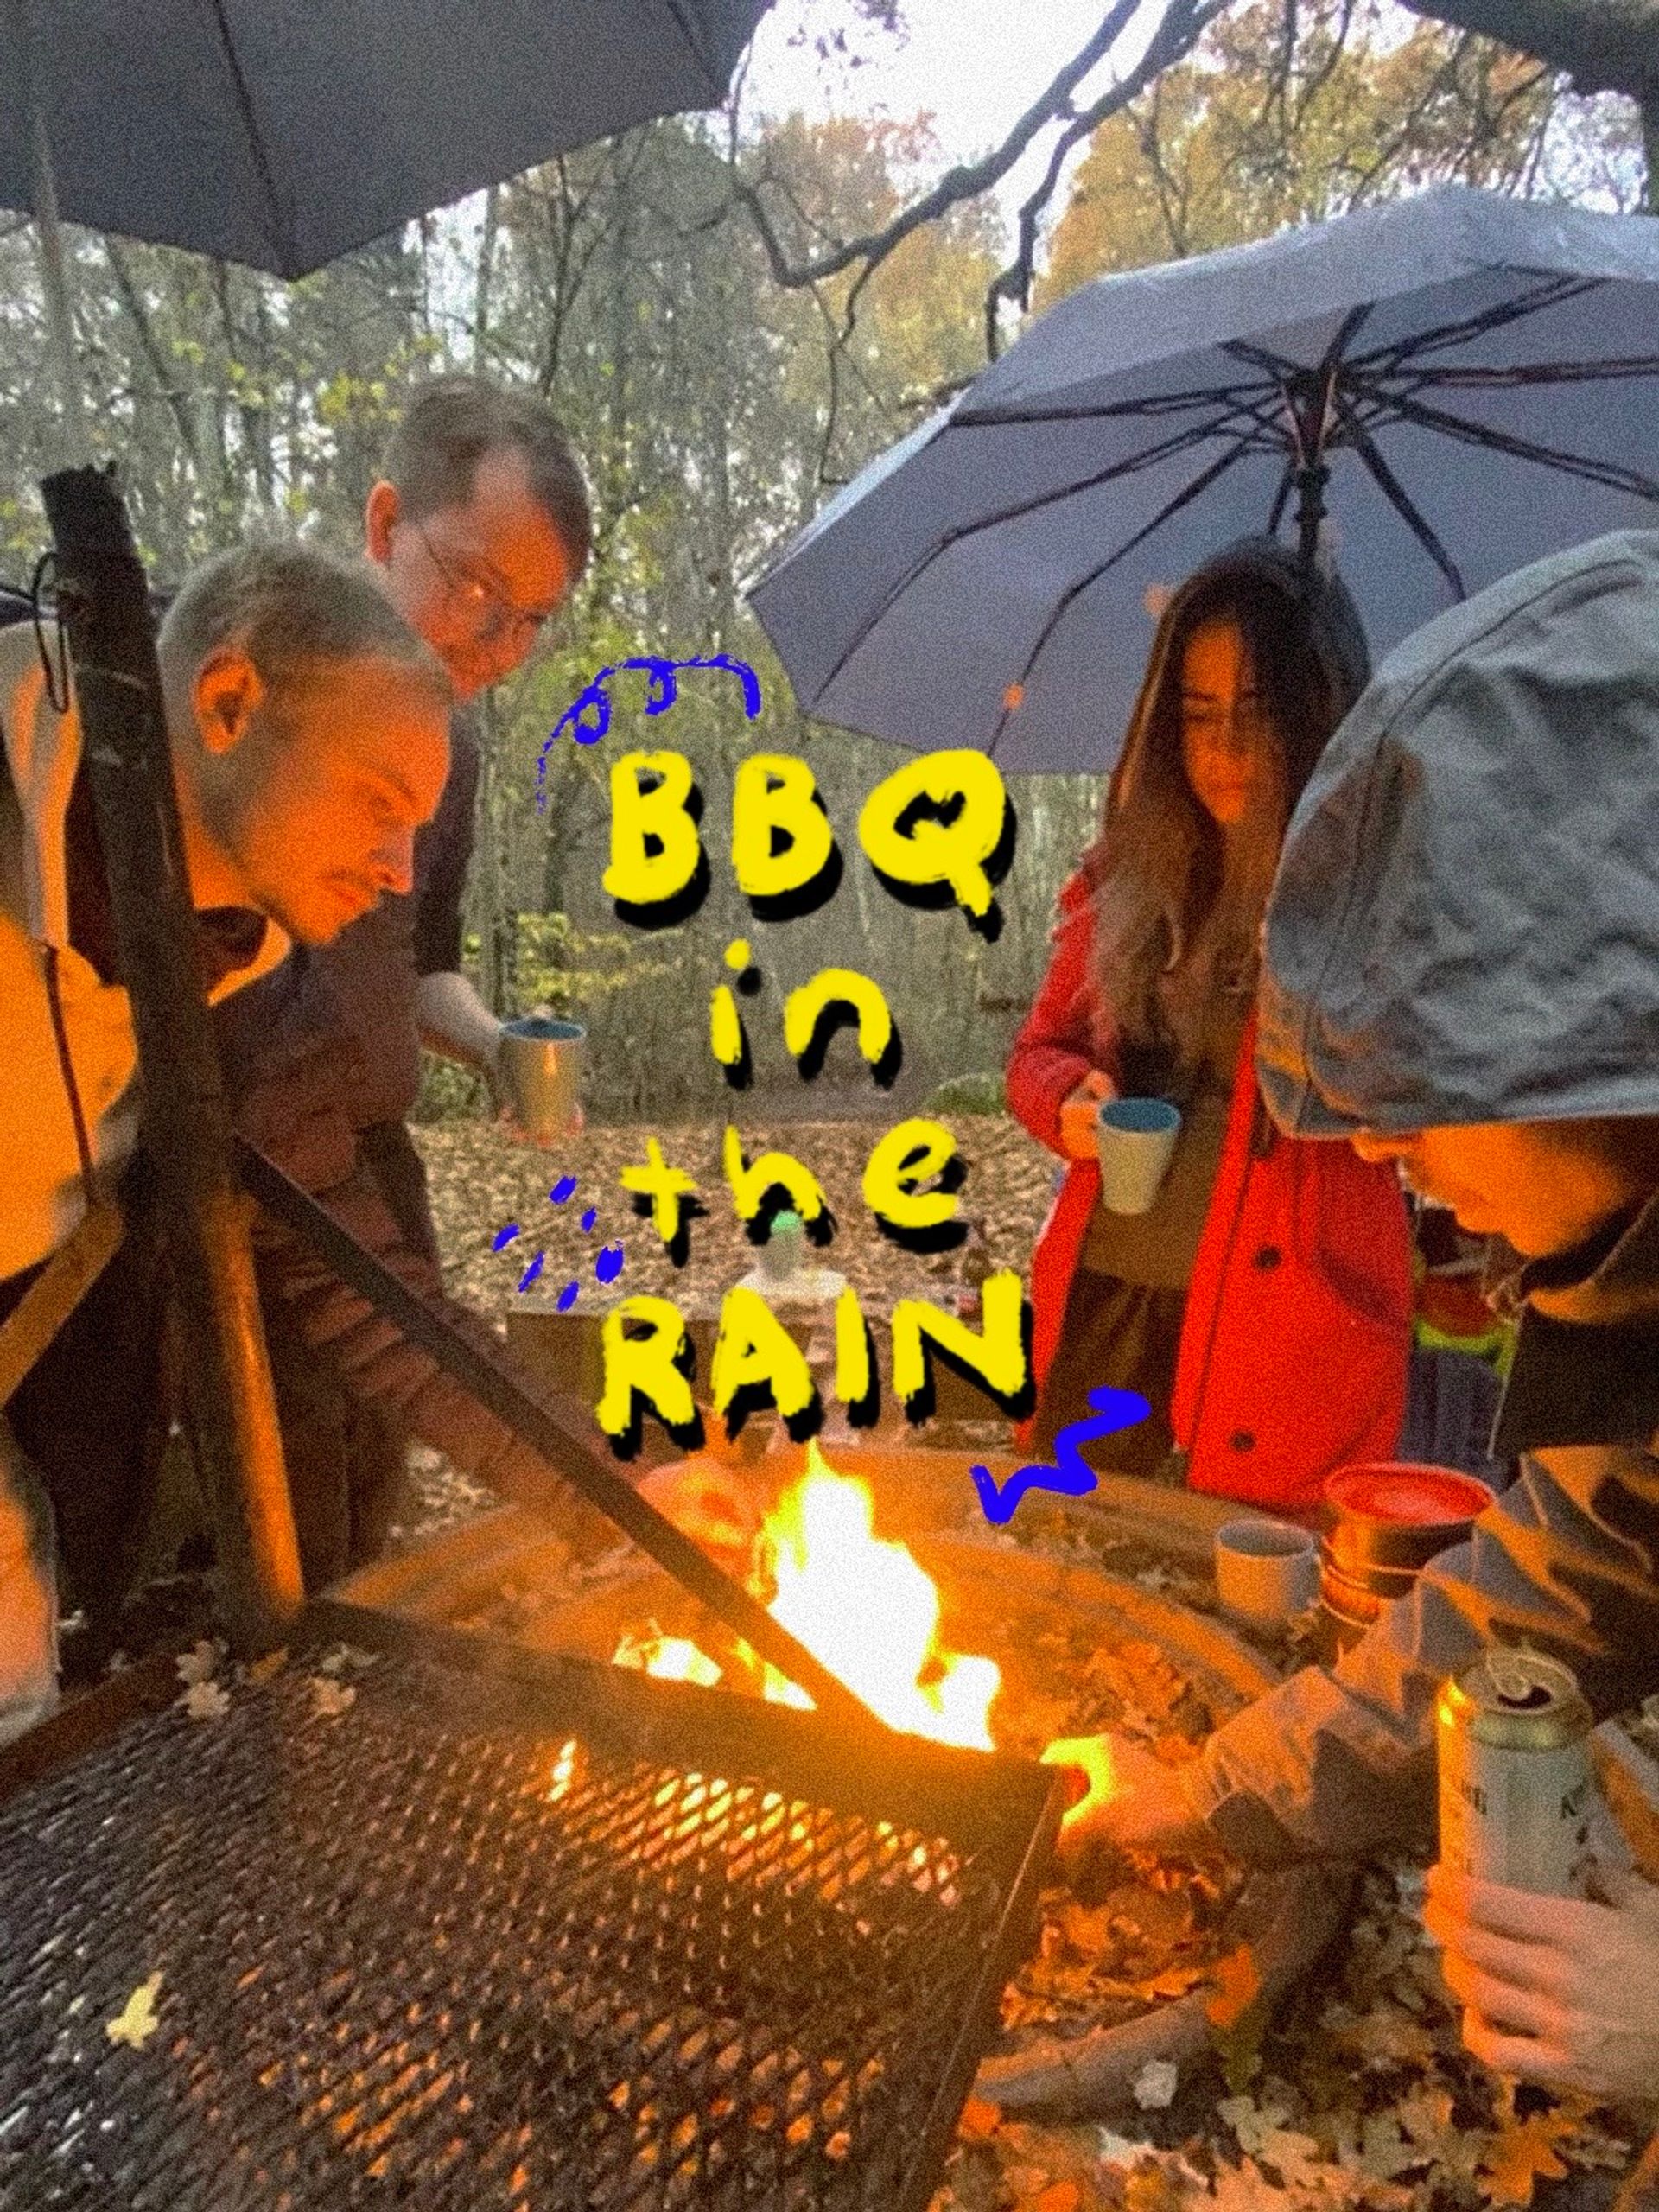 International students in Sweden grilling barbeque in autumn rain